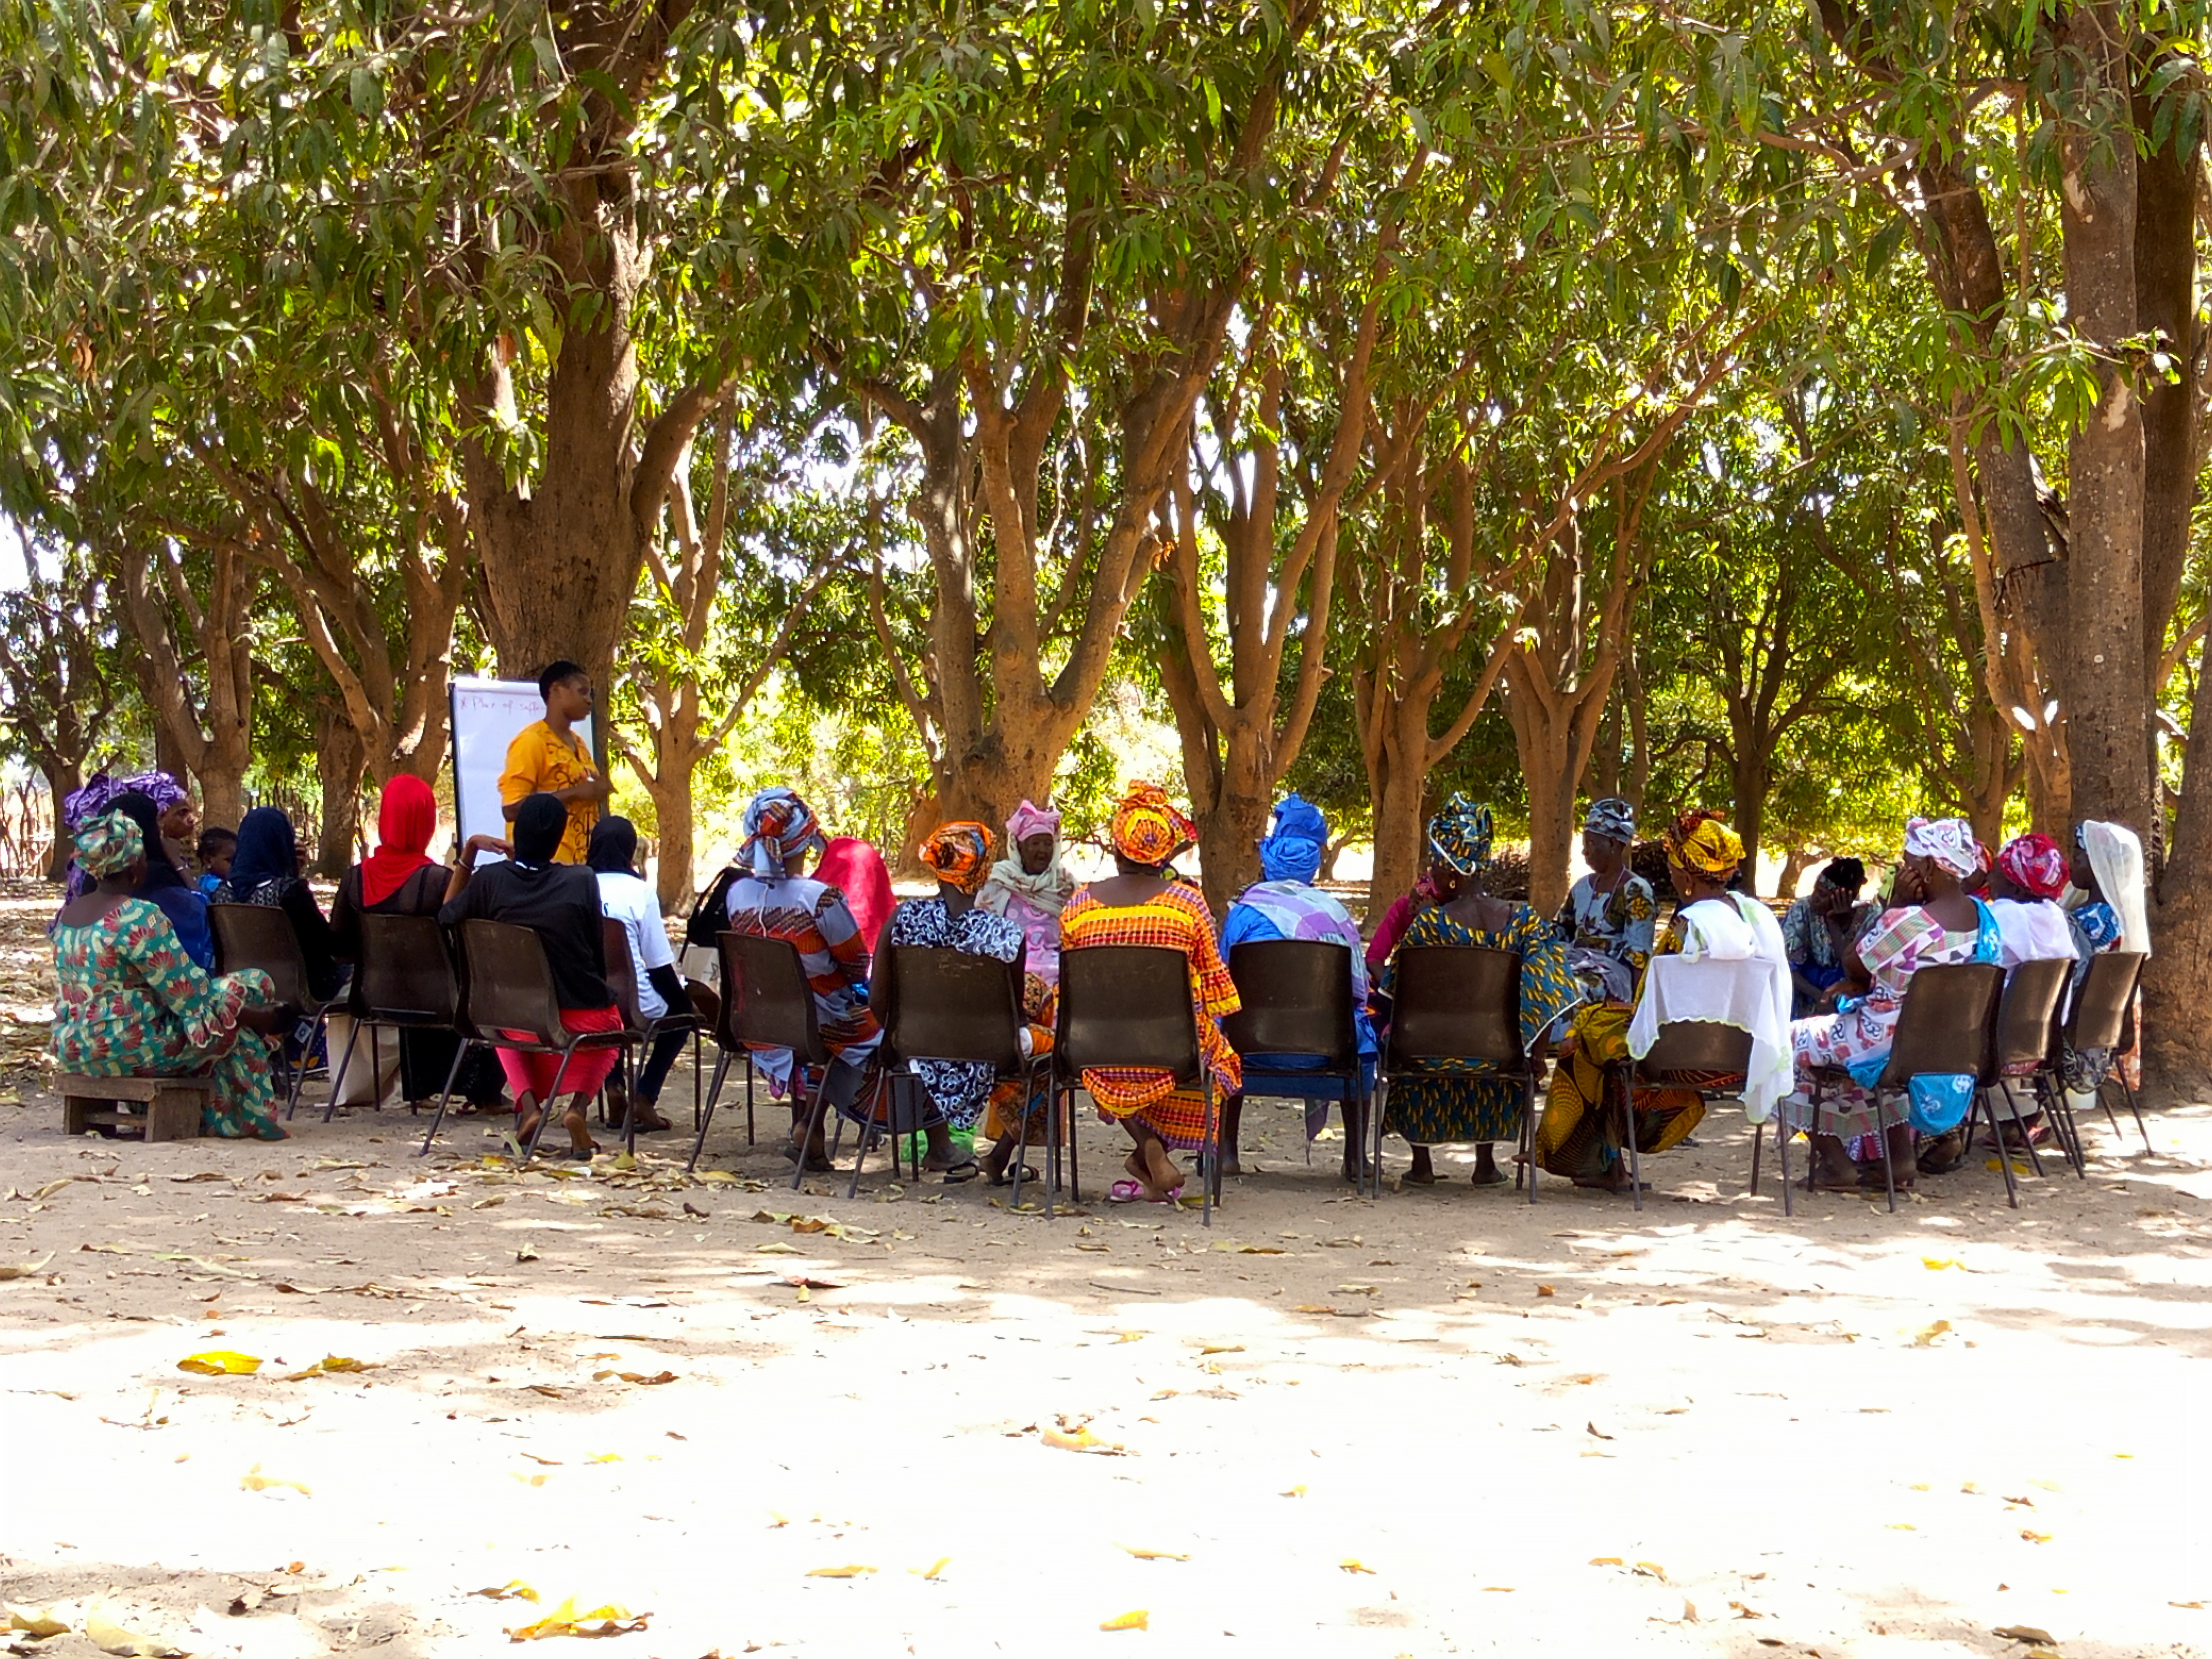 Women sit in plastic chairs in a circle under the trees, while one woman stands taking notes on a large notebook.